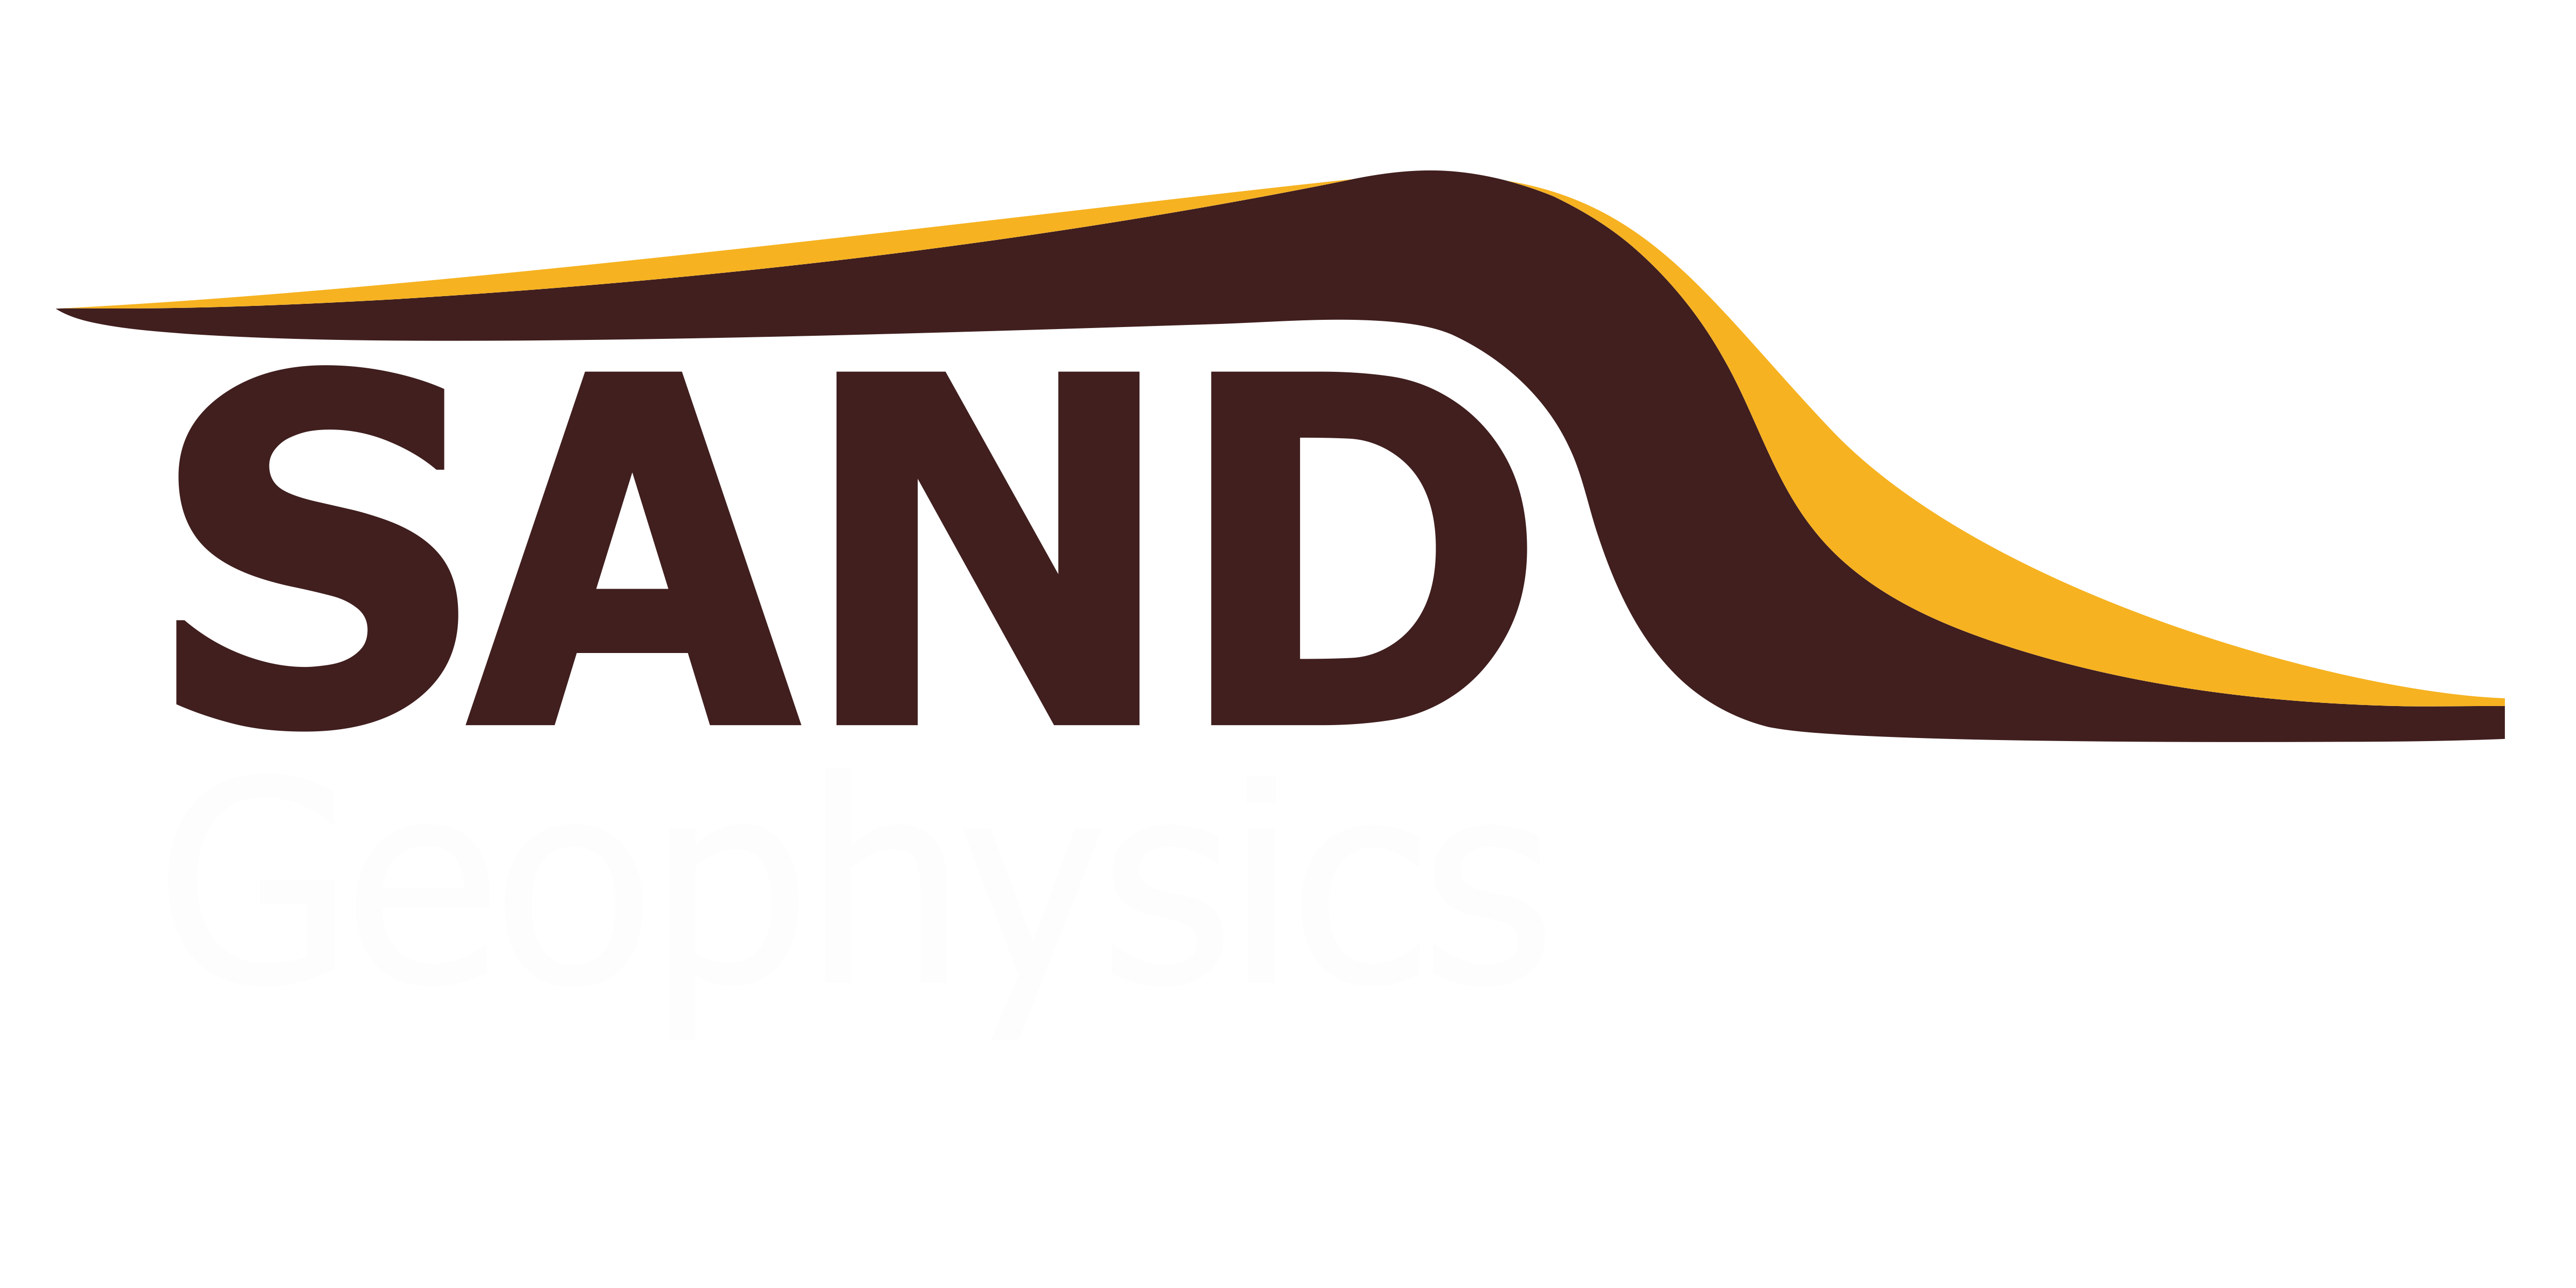 Sand Logo - SAND geophysics & Near Surface Detection Specialists